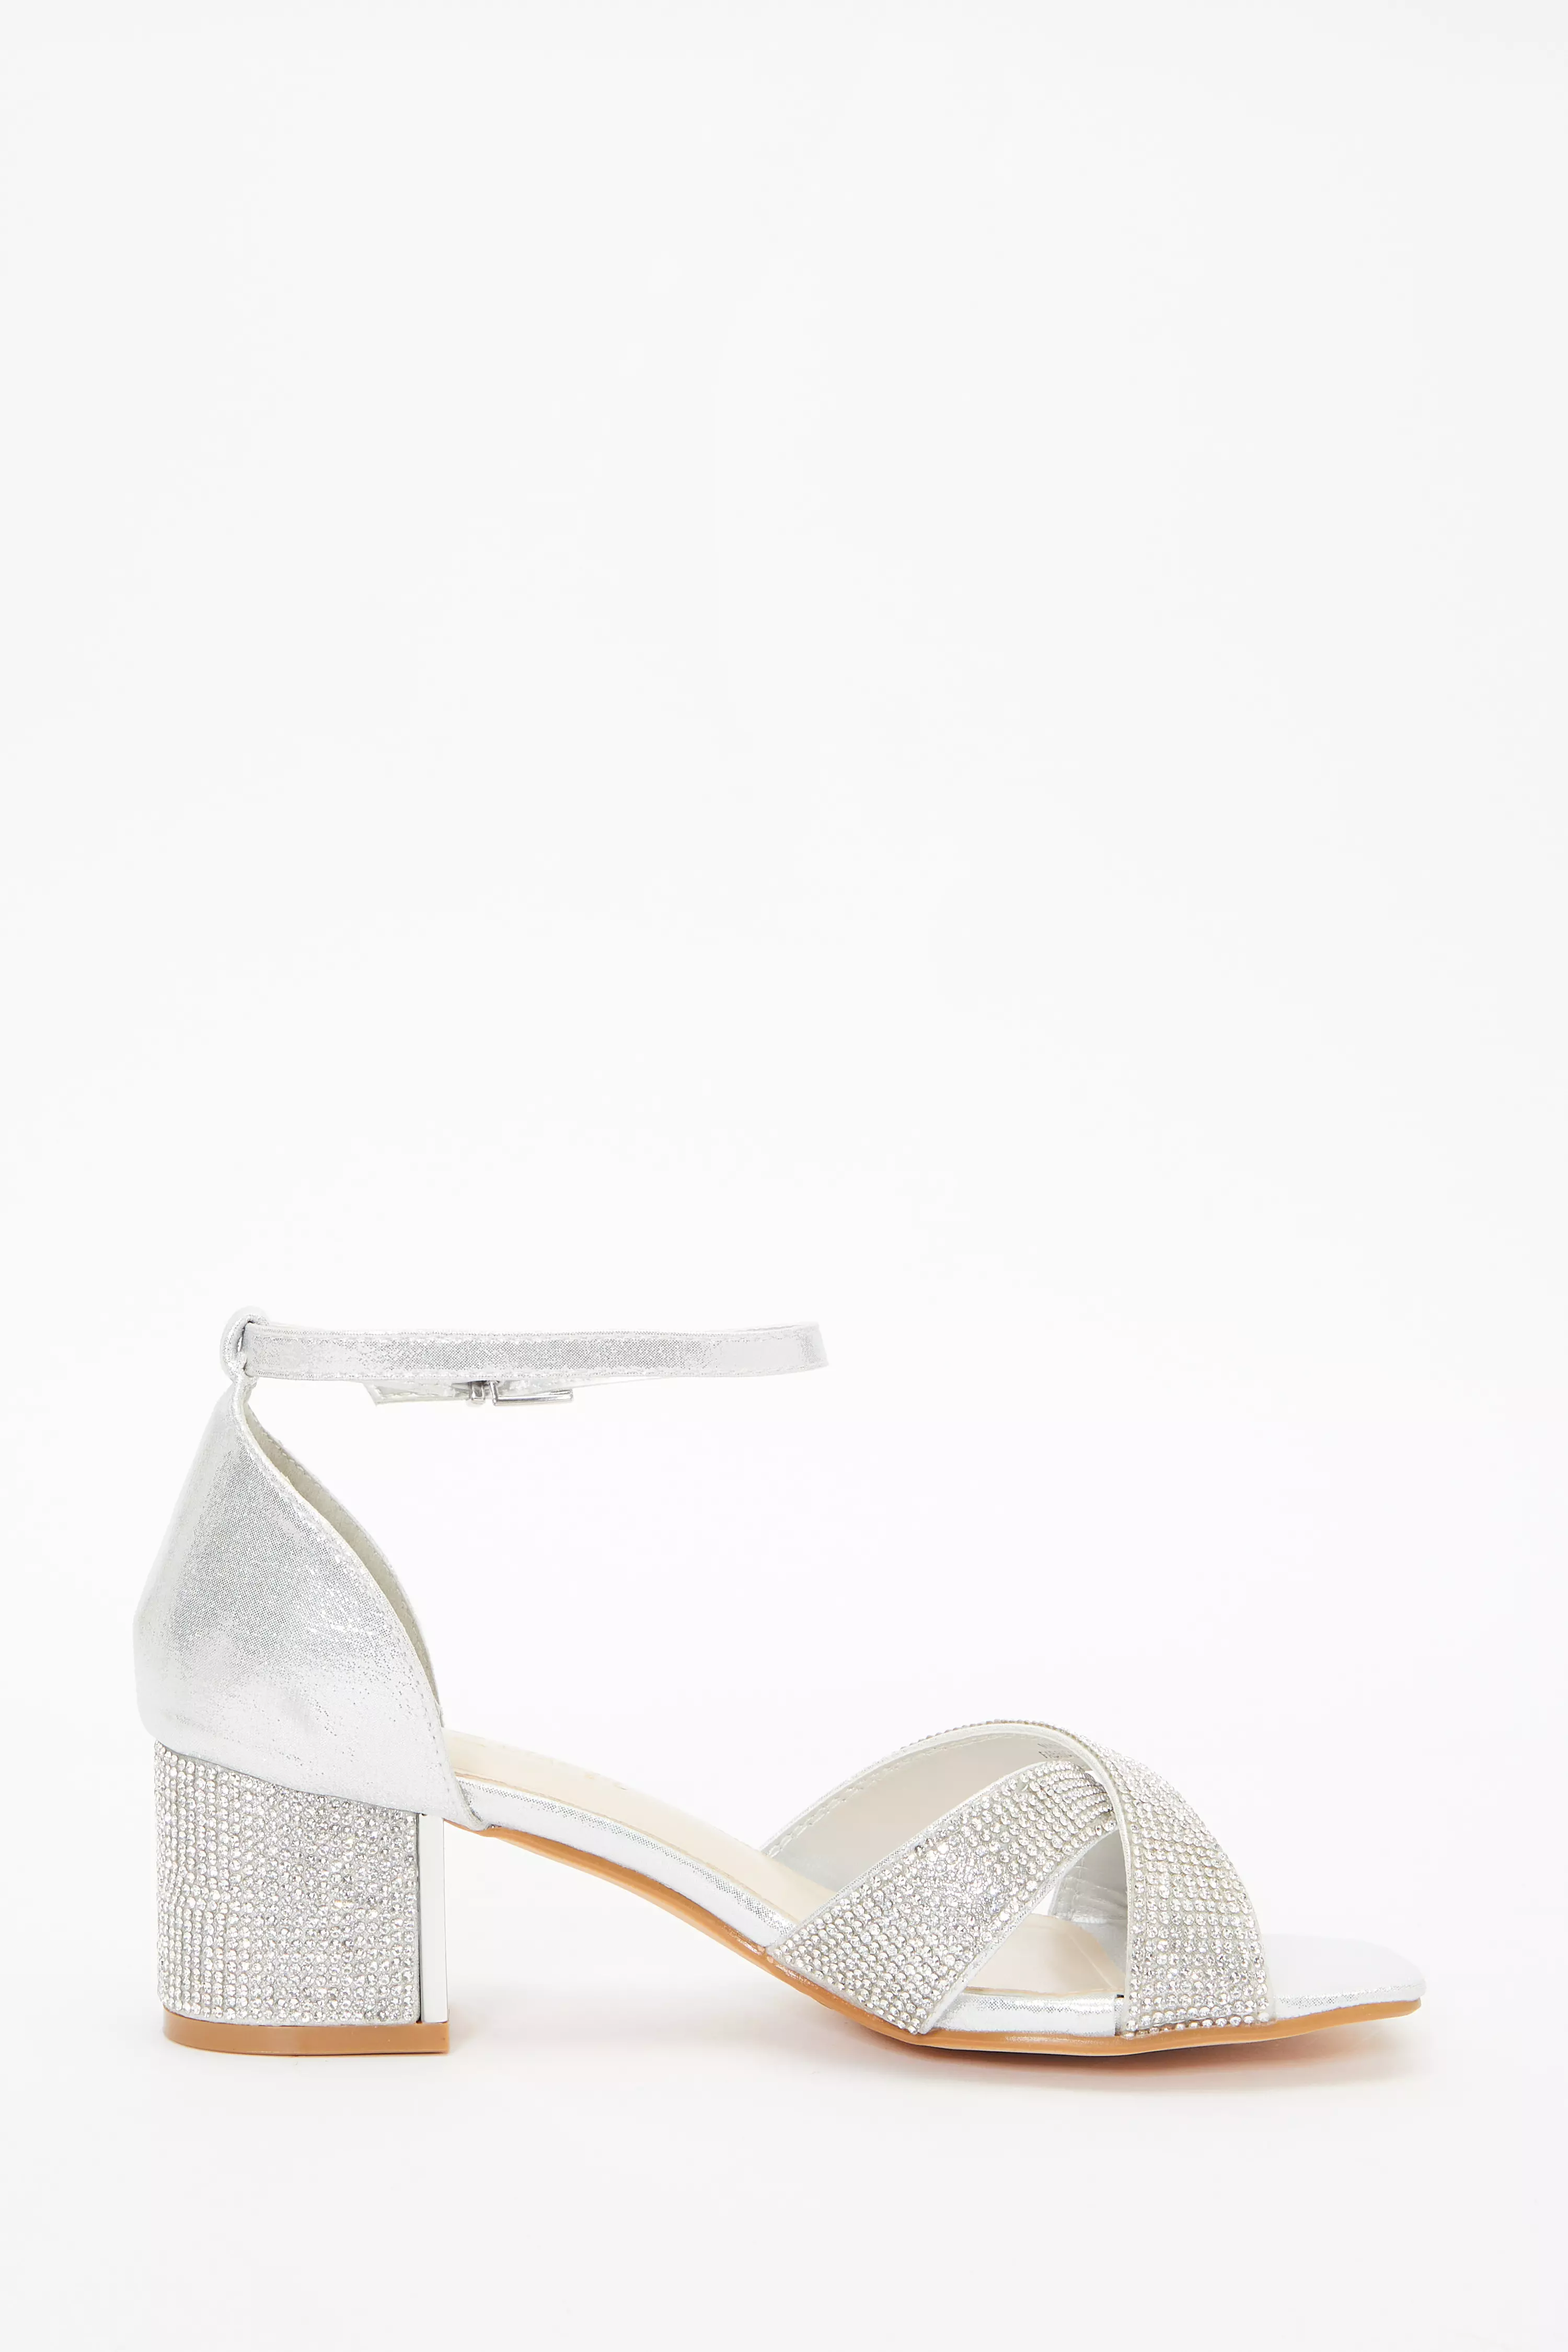 Wide Fit Silver Shimmer Diamante Heeled Sandals - QUIZ Clothing